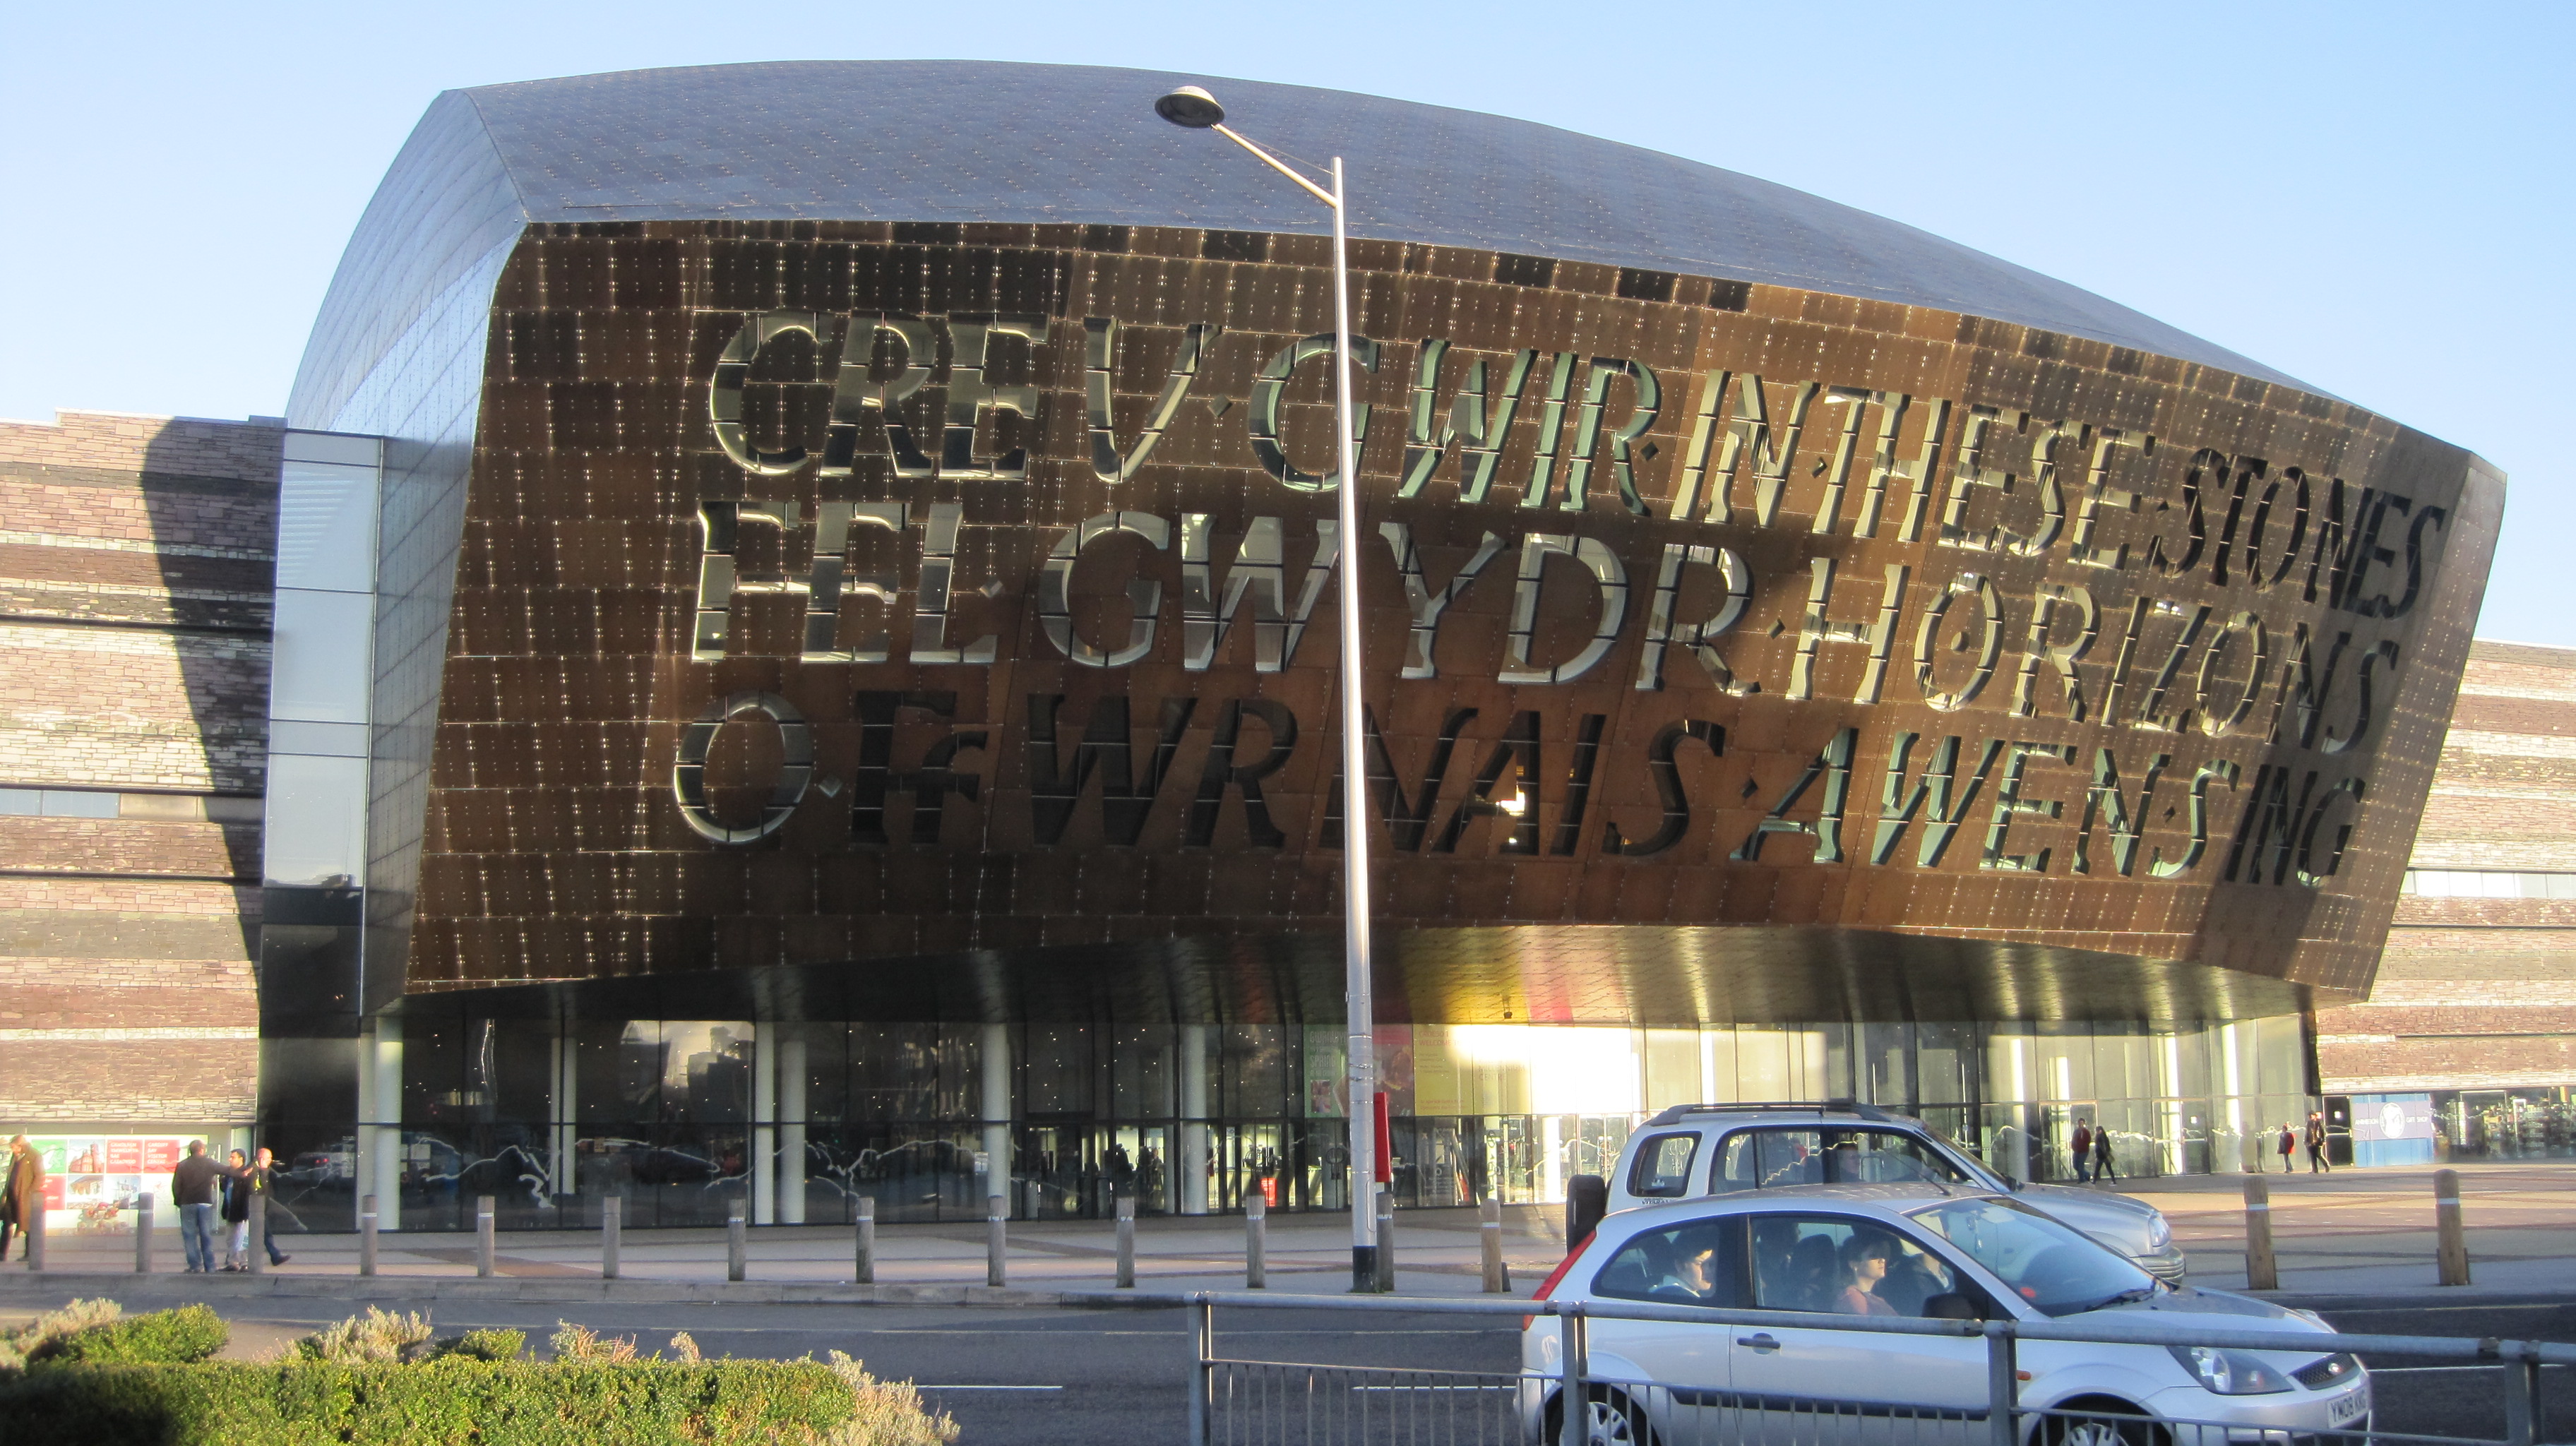 Wales Millennium Centre in Cardiff by Juliamaud